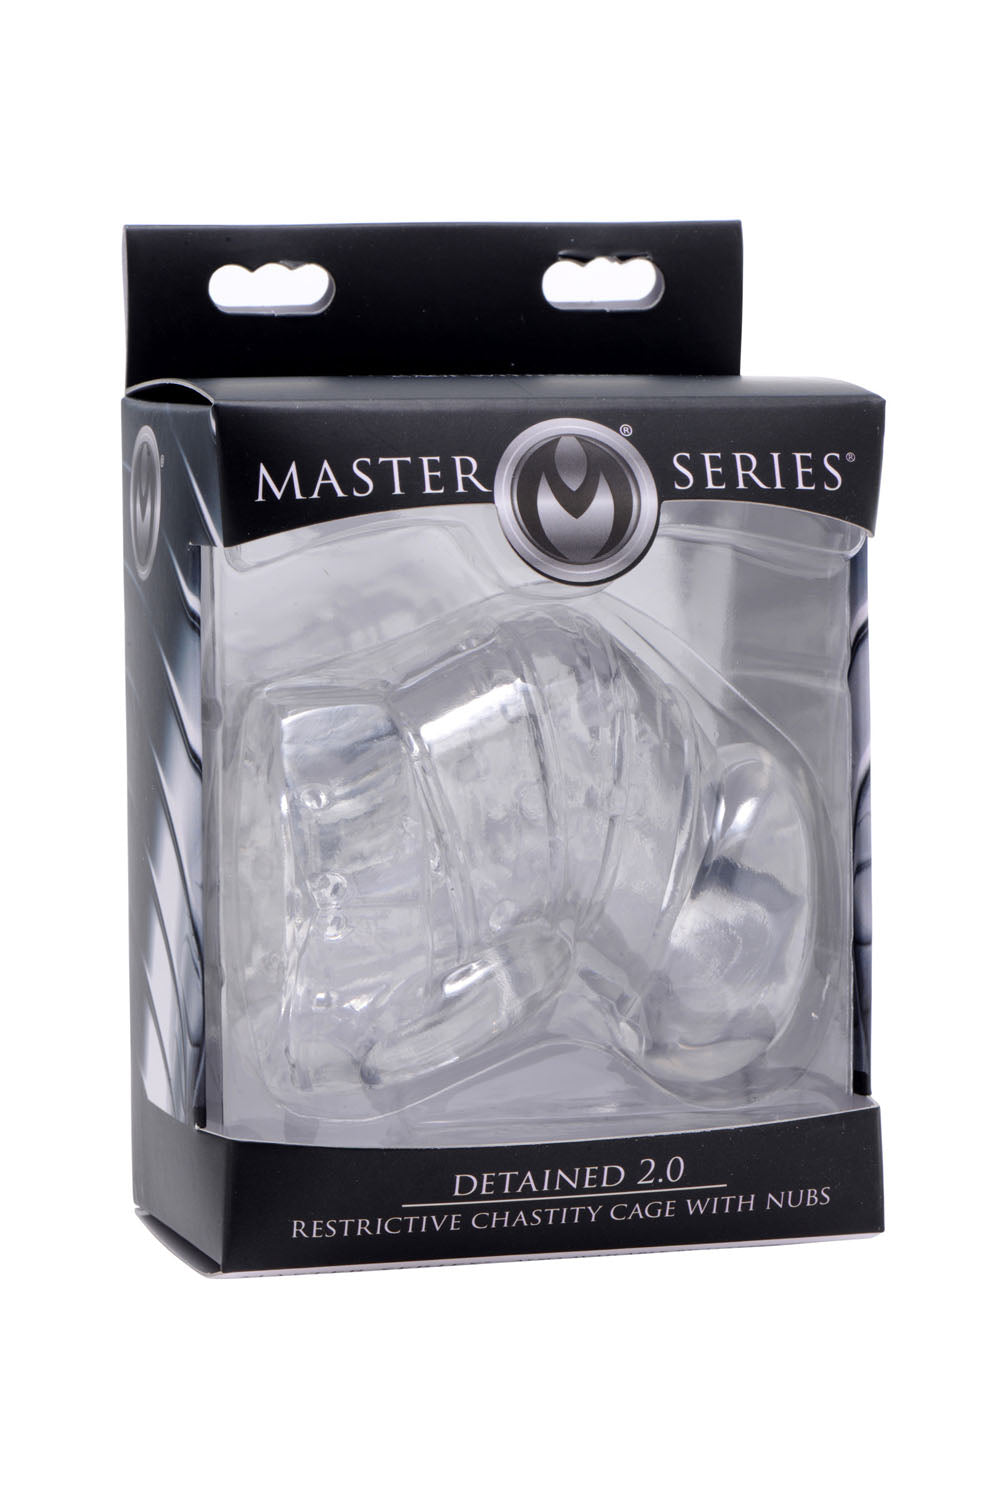 Detained 2.0 Restrictive Chastity Cage With Nubs-2